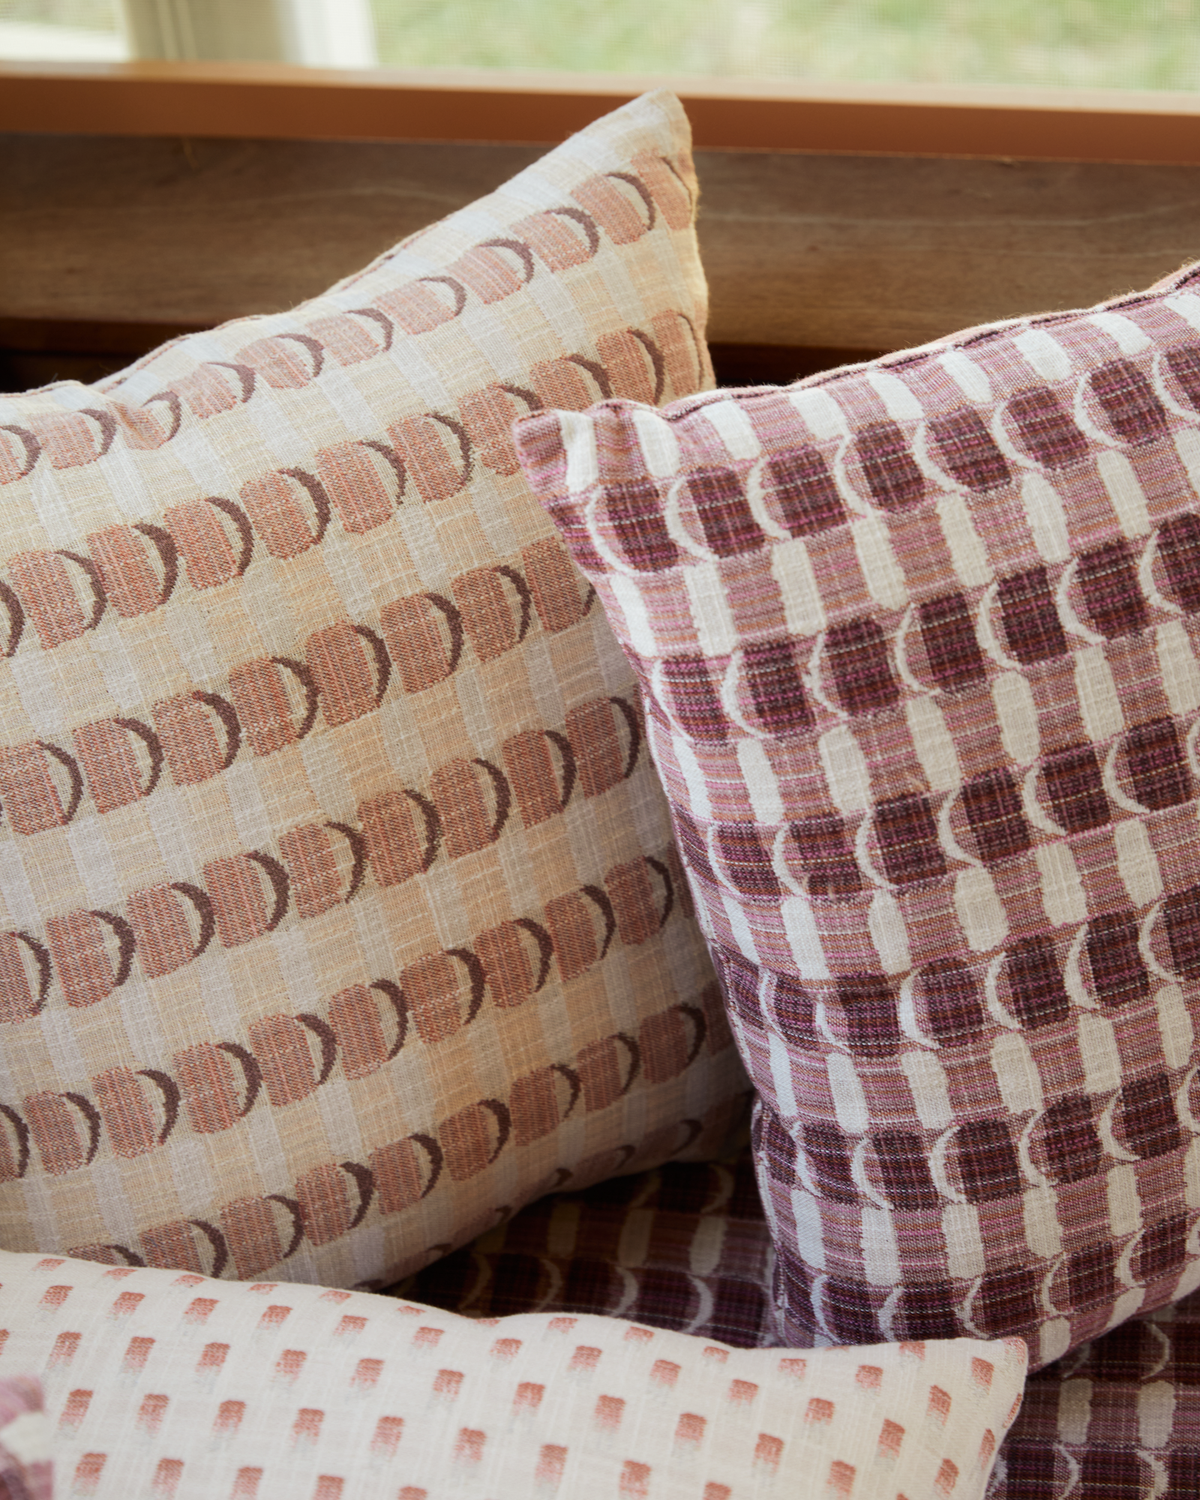 Crescent Plaid Pillow in Pink